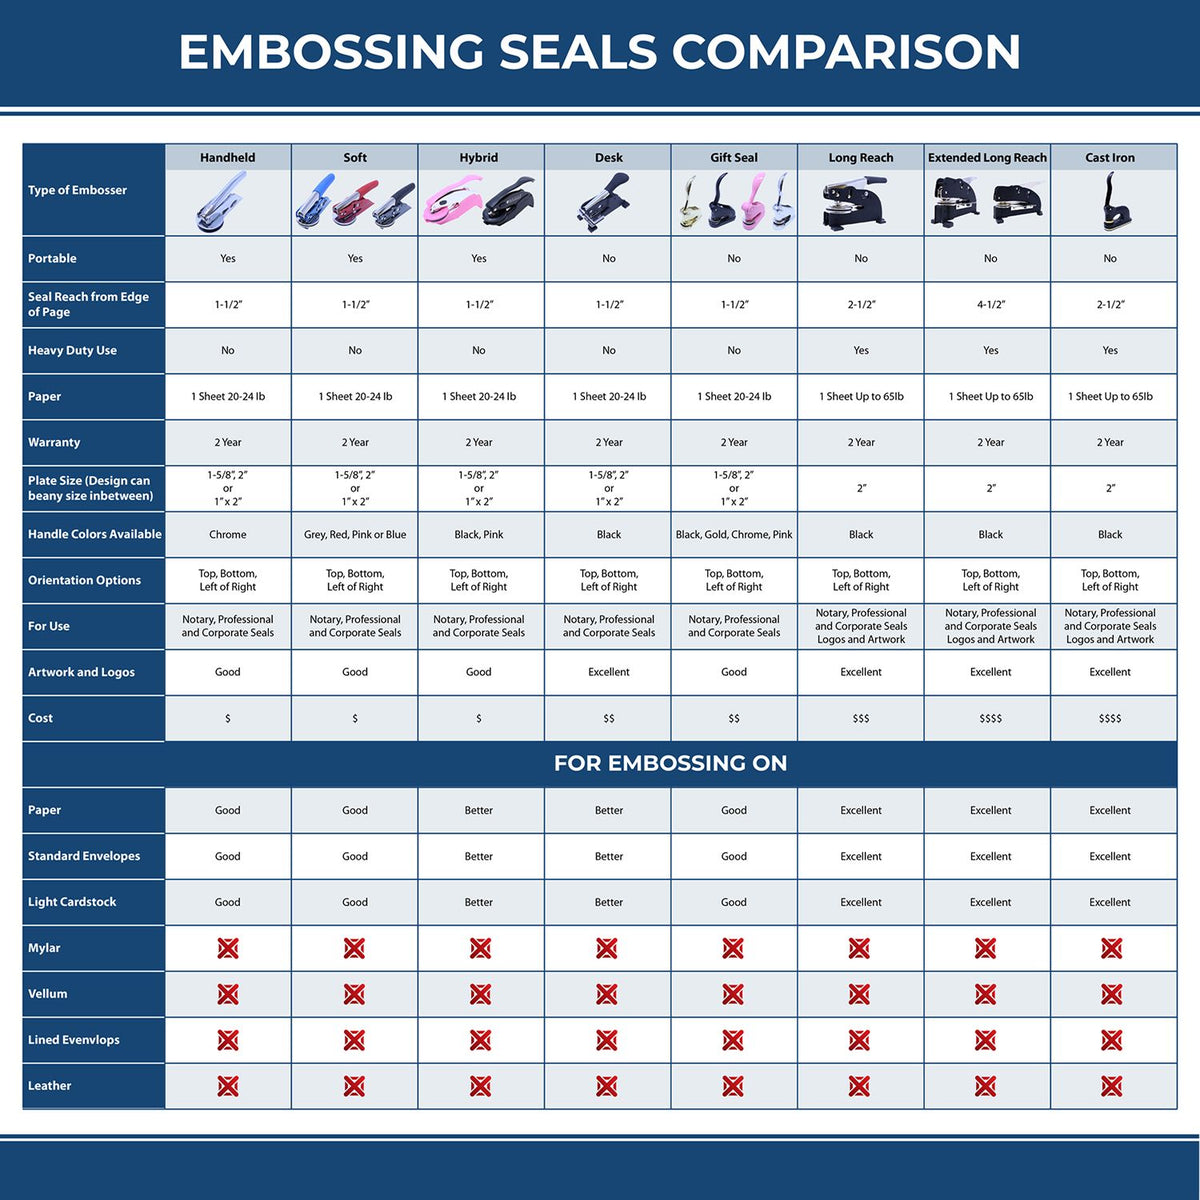 A comparison chart for the different types of mount models available for the Hybrid New Hampshire Architect Seal